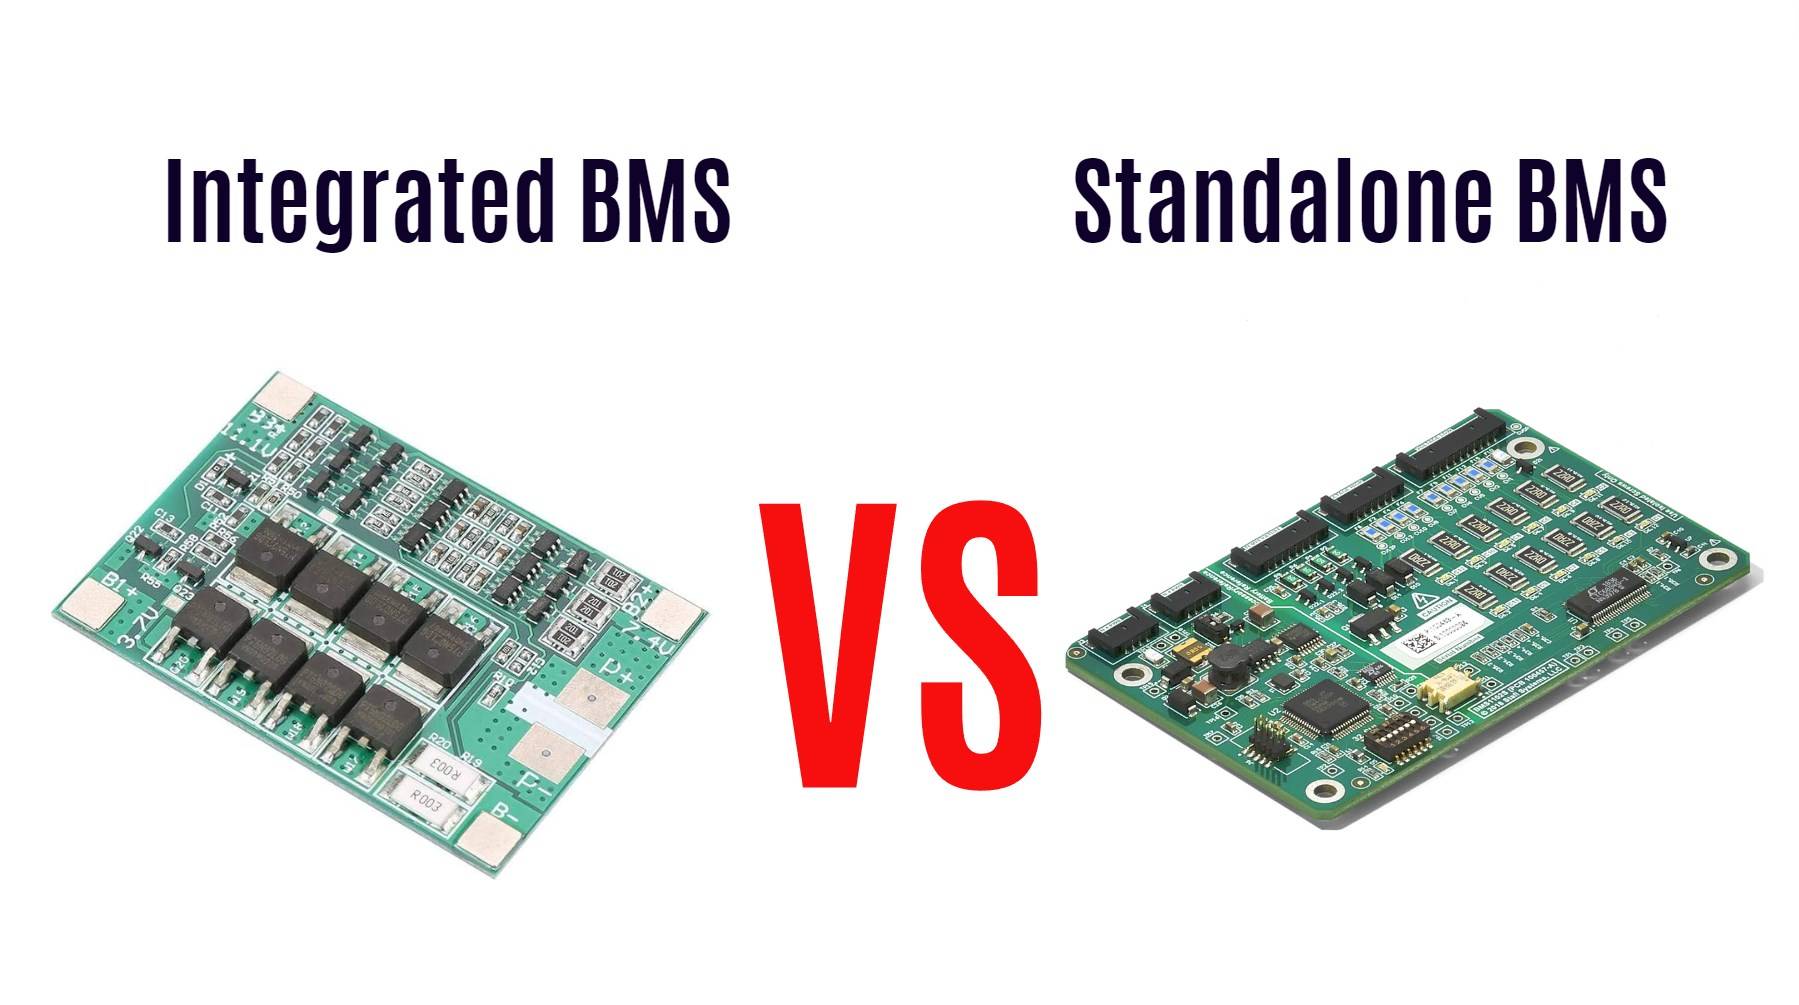 Integrated BMS vs. Standalone BMS, What are the differences?